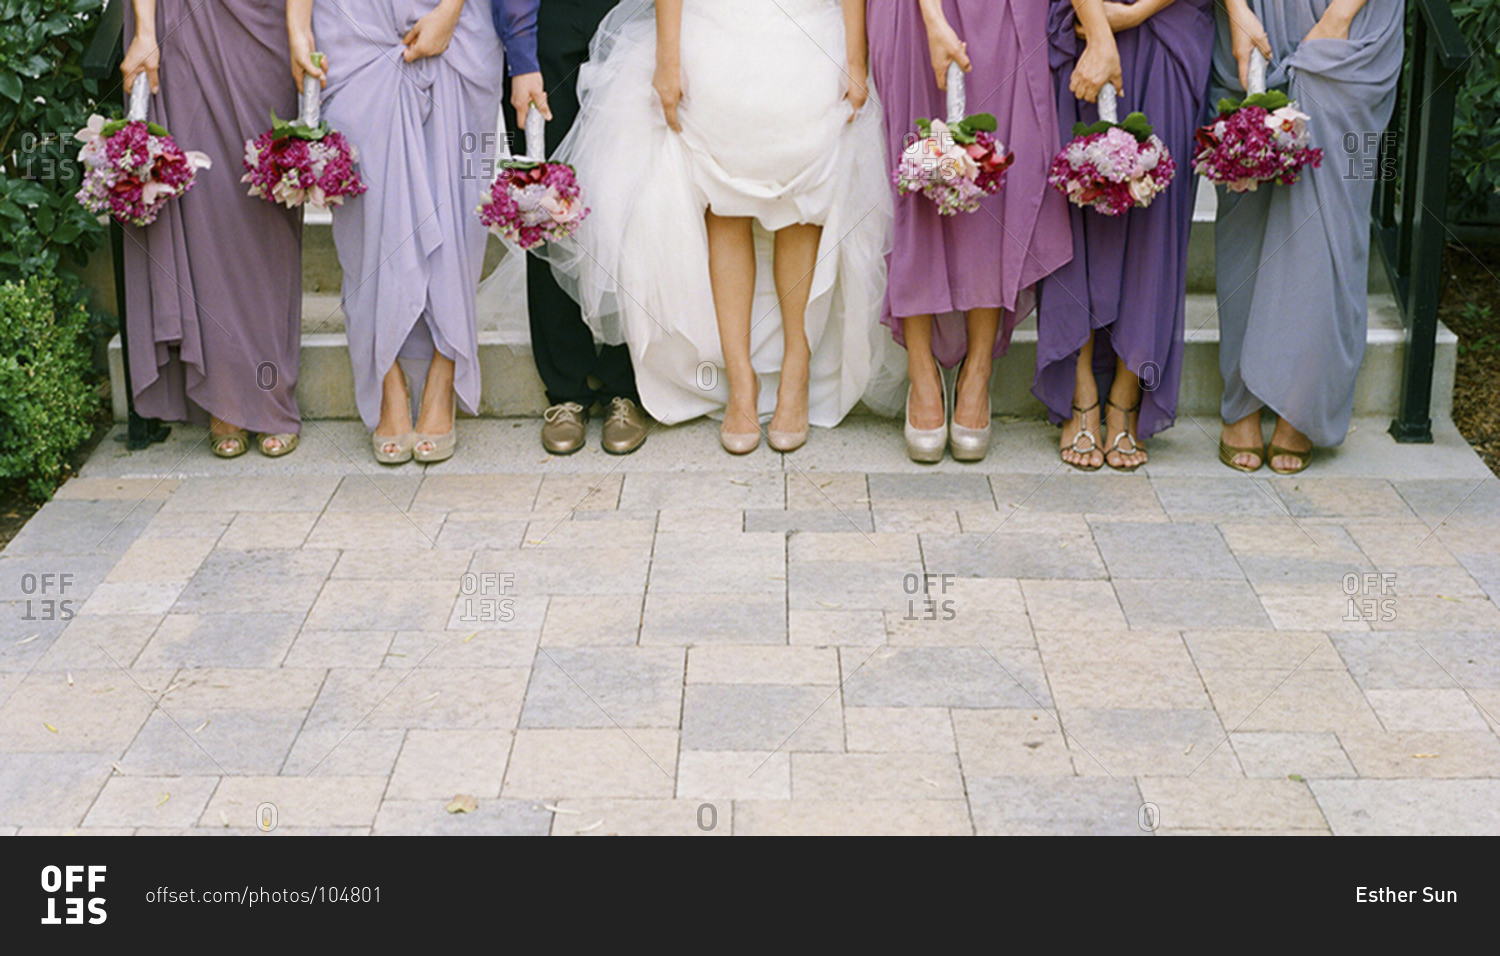 Feet and legs of wedding party